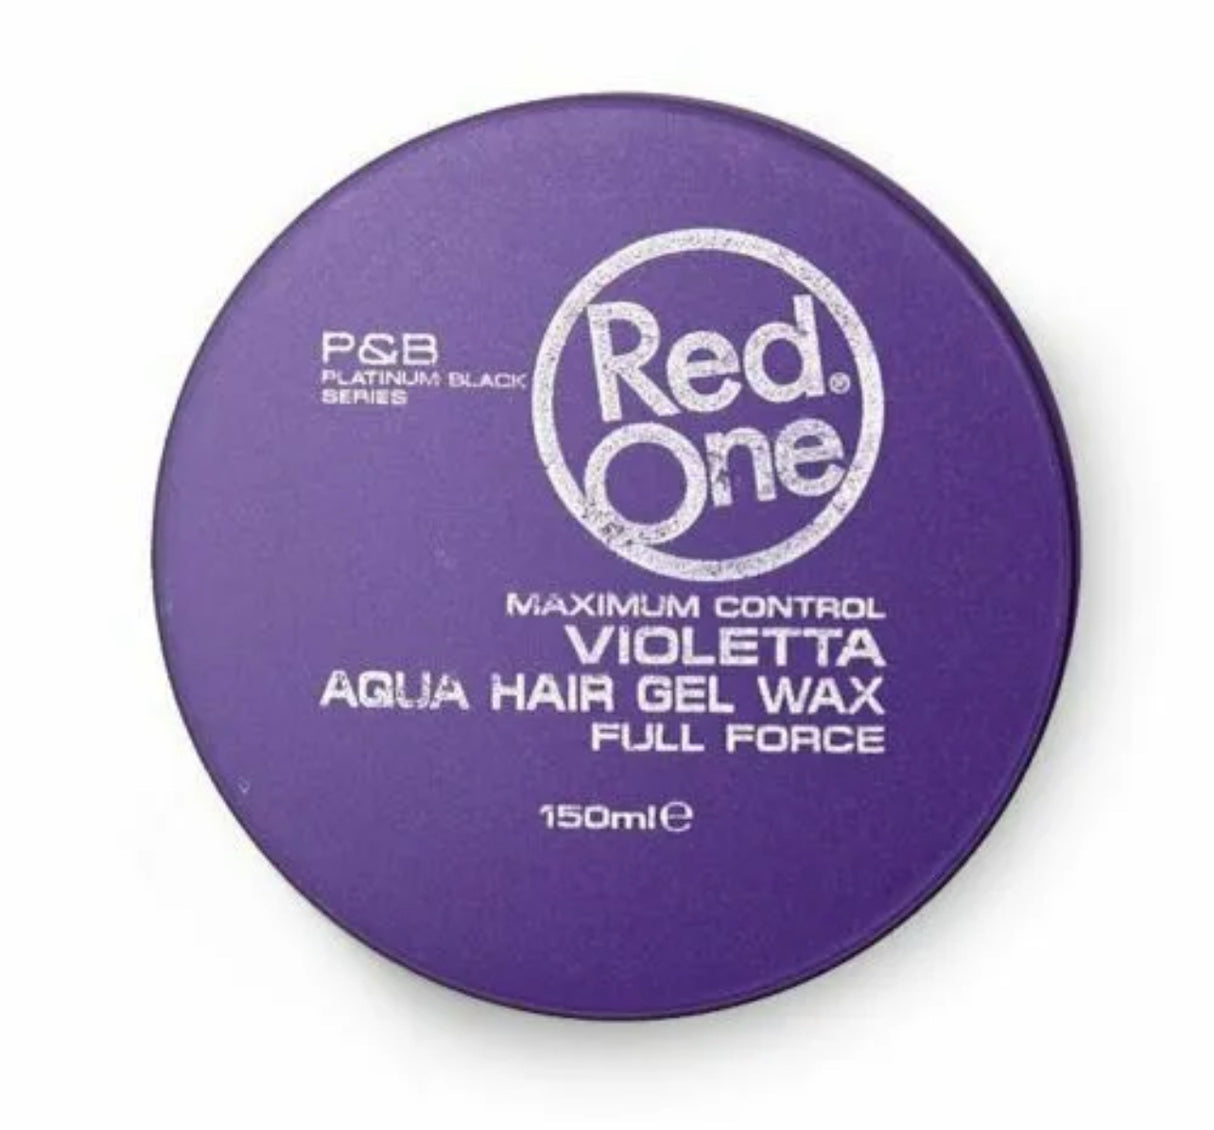 2x Red one Full Force Purple Hair Styling Wax Men